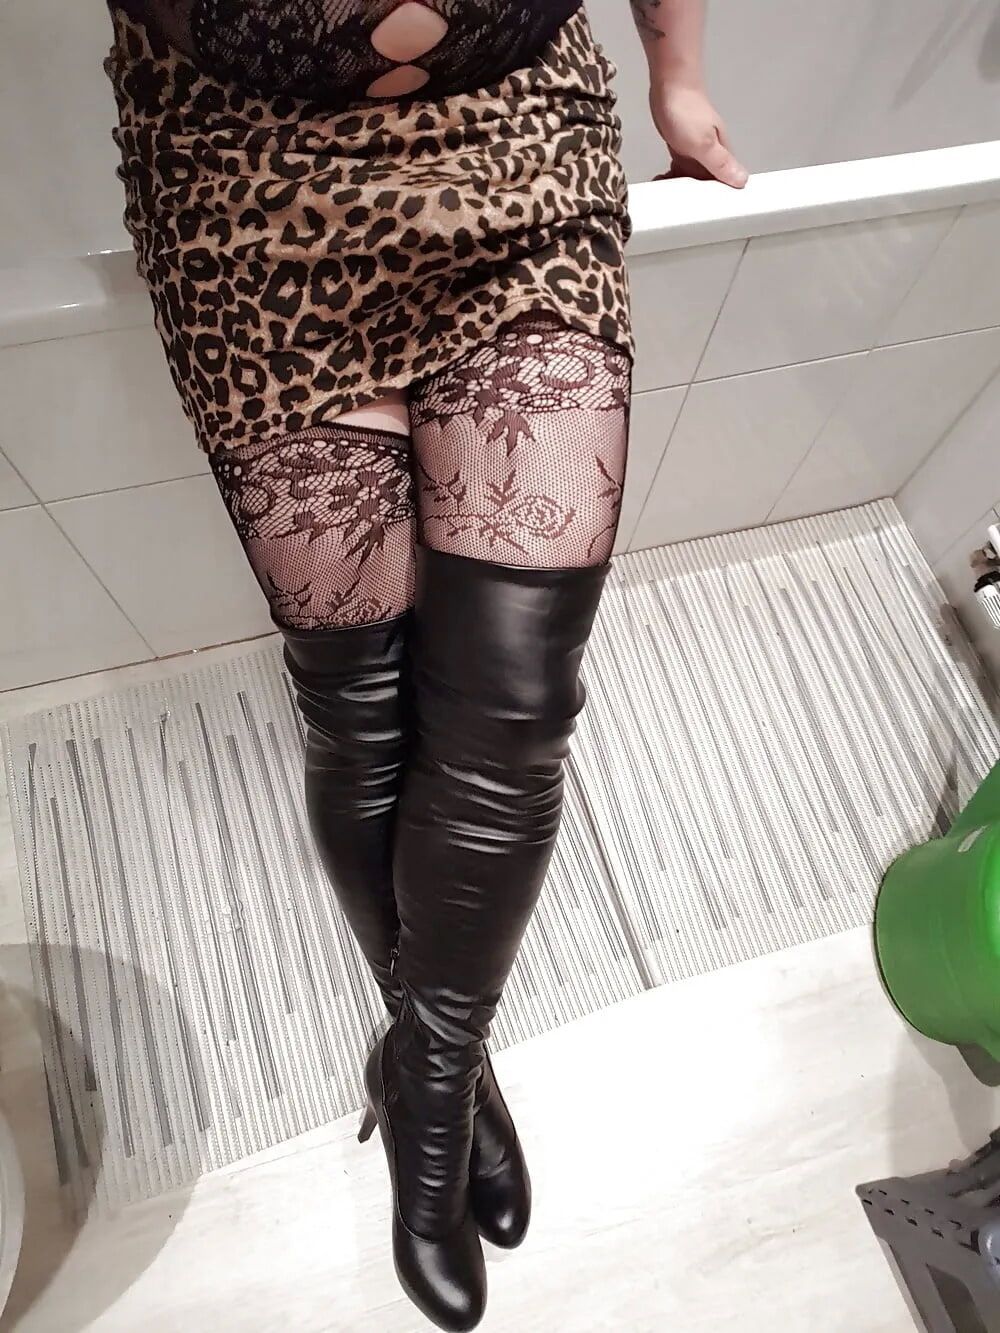 Lepard outfit with black boots and lingerie